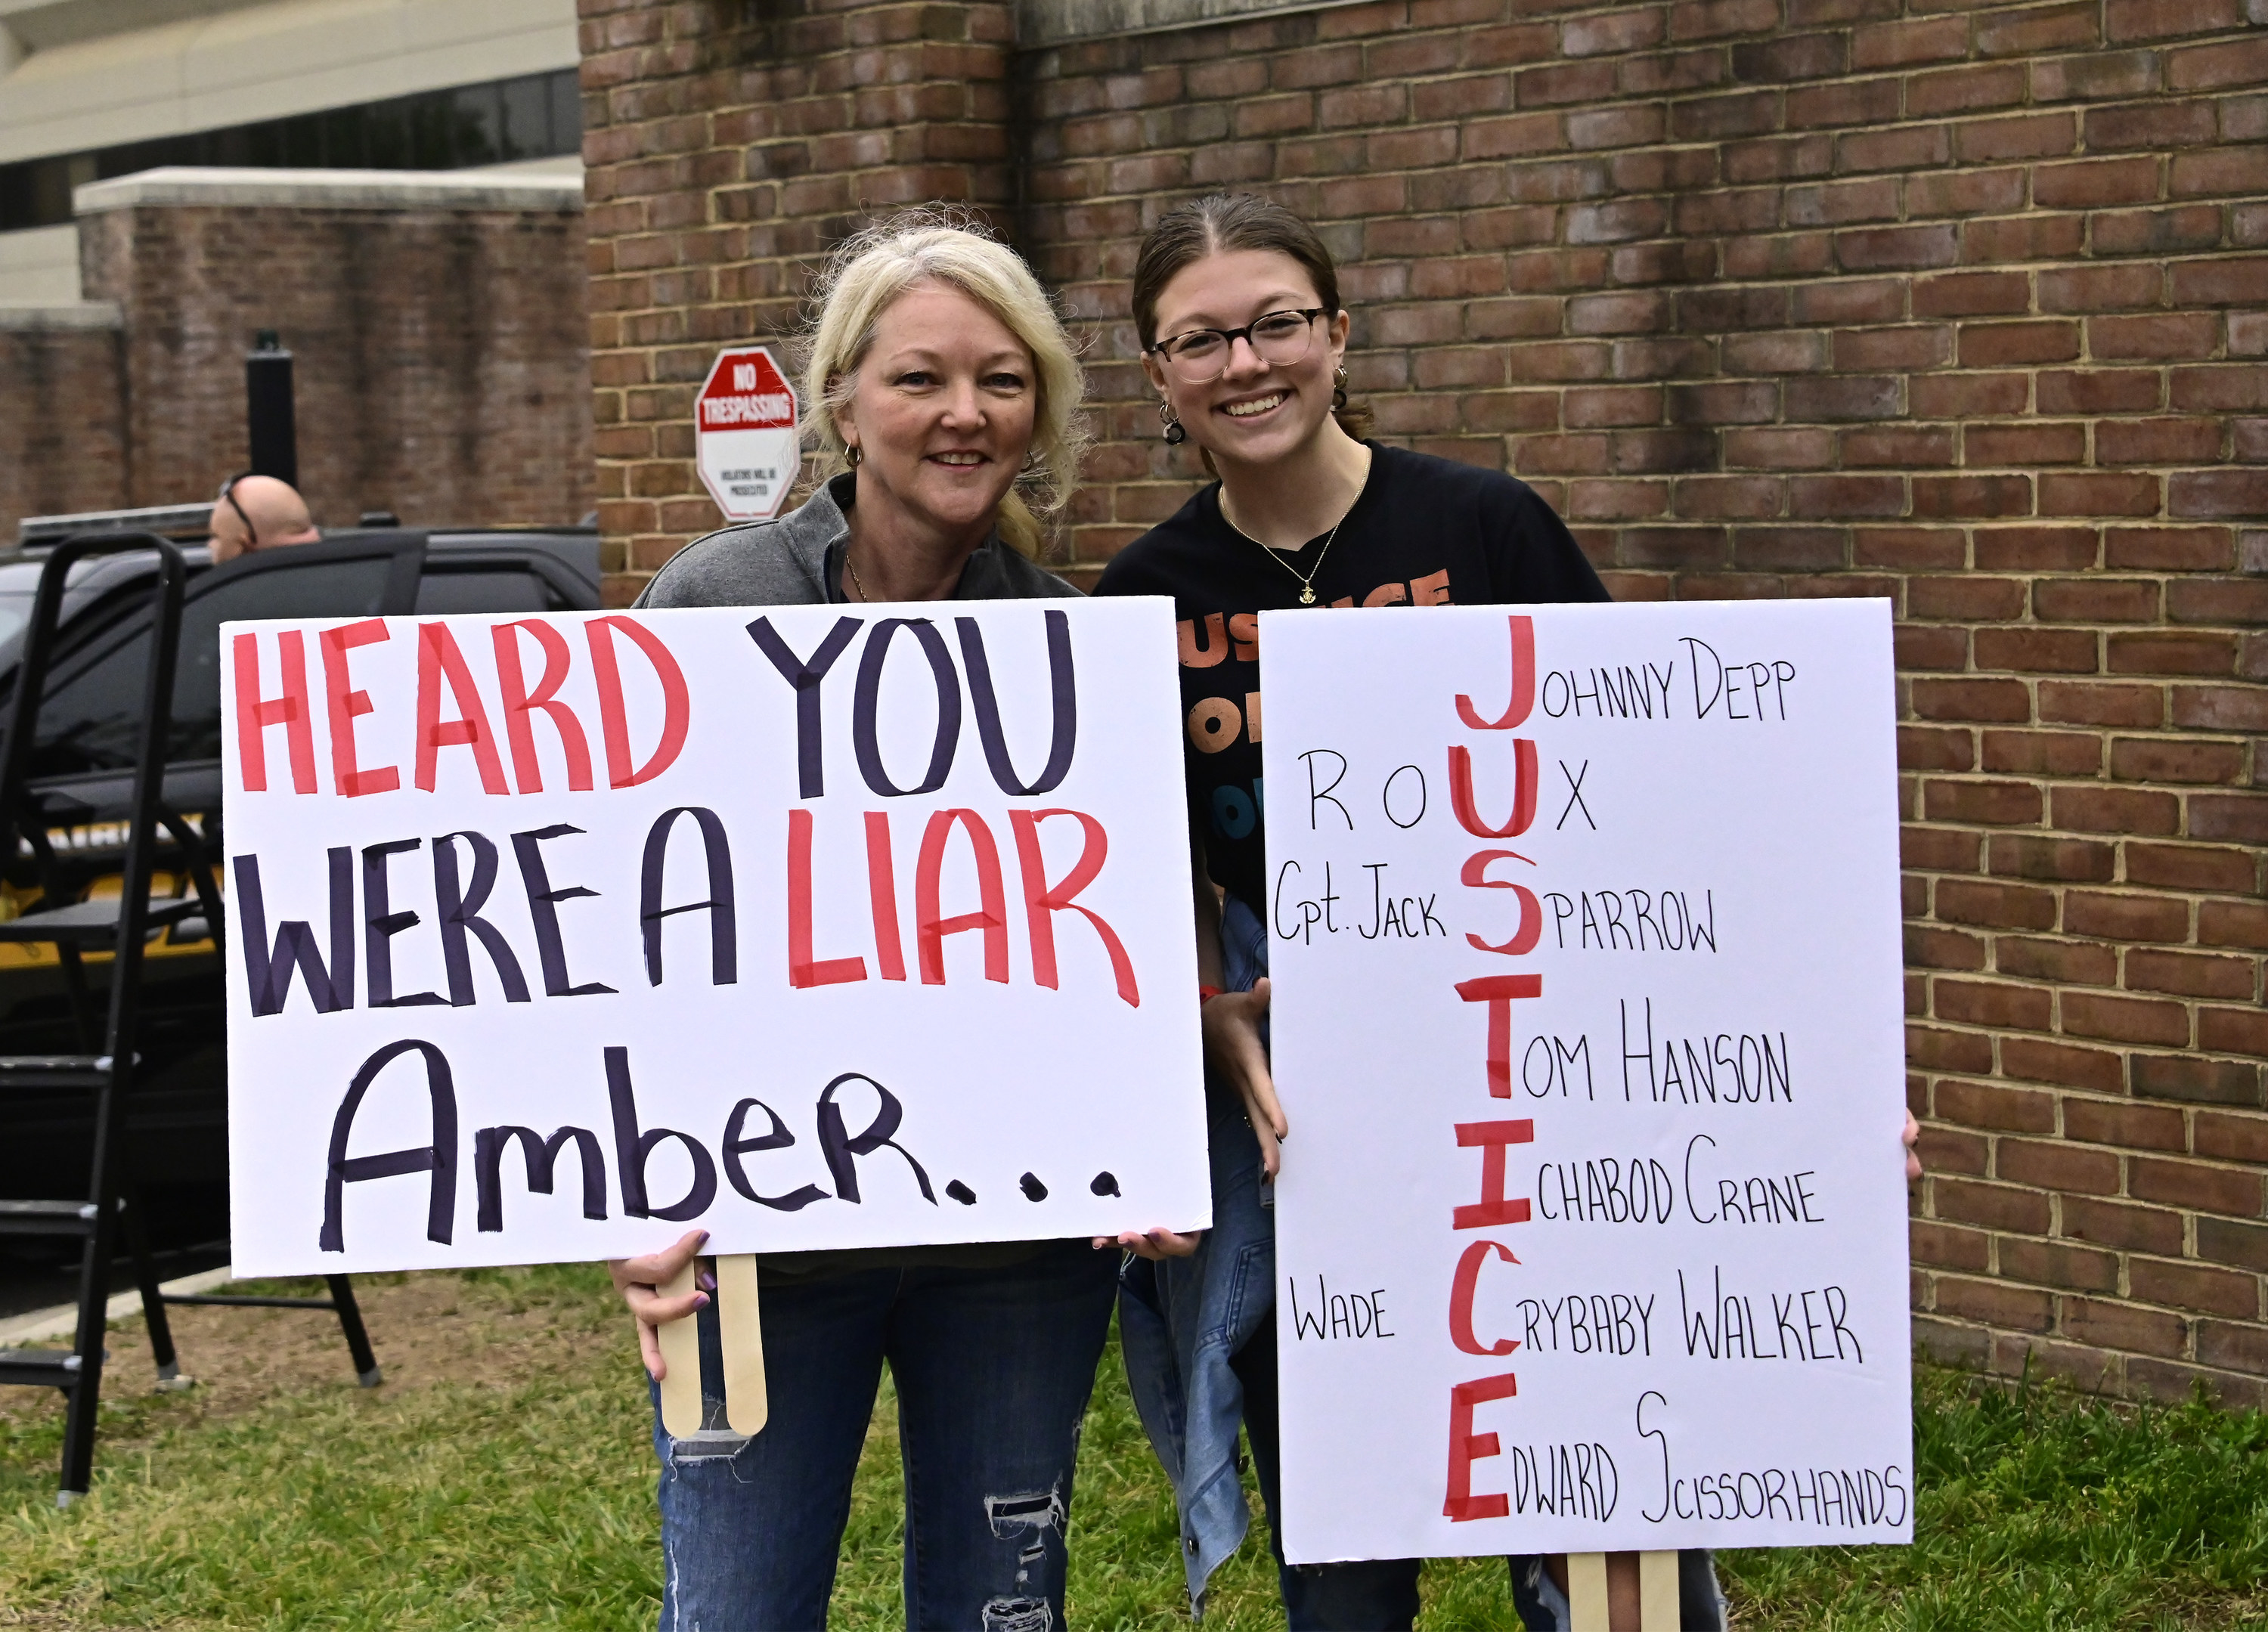 signs read &quot;heard you were a liar amber&quot; and &quot;justice&quot; for johnny depp